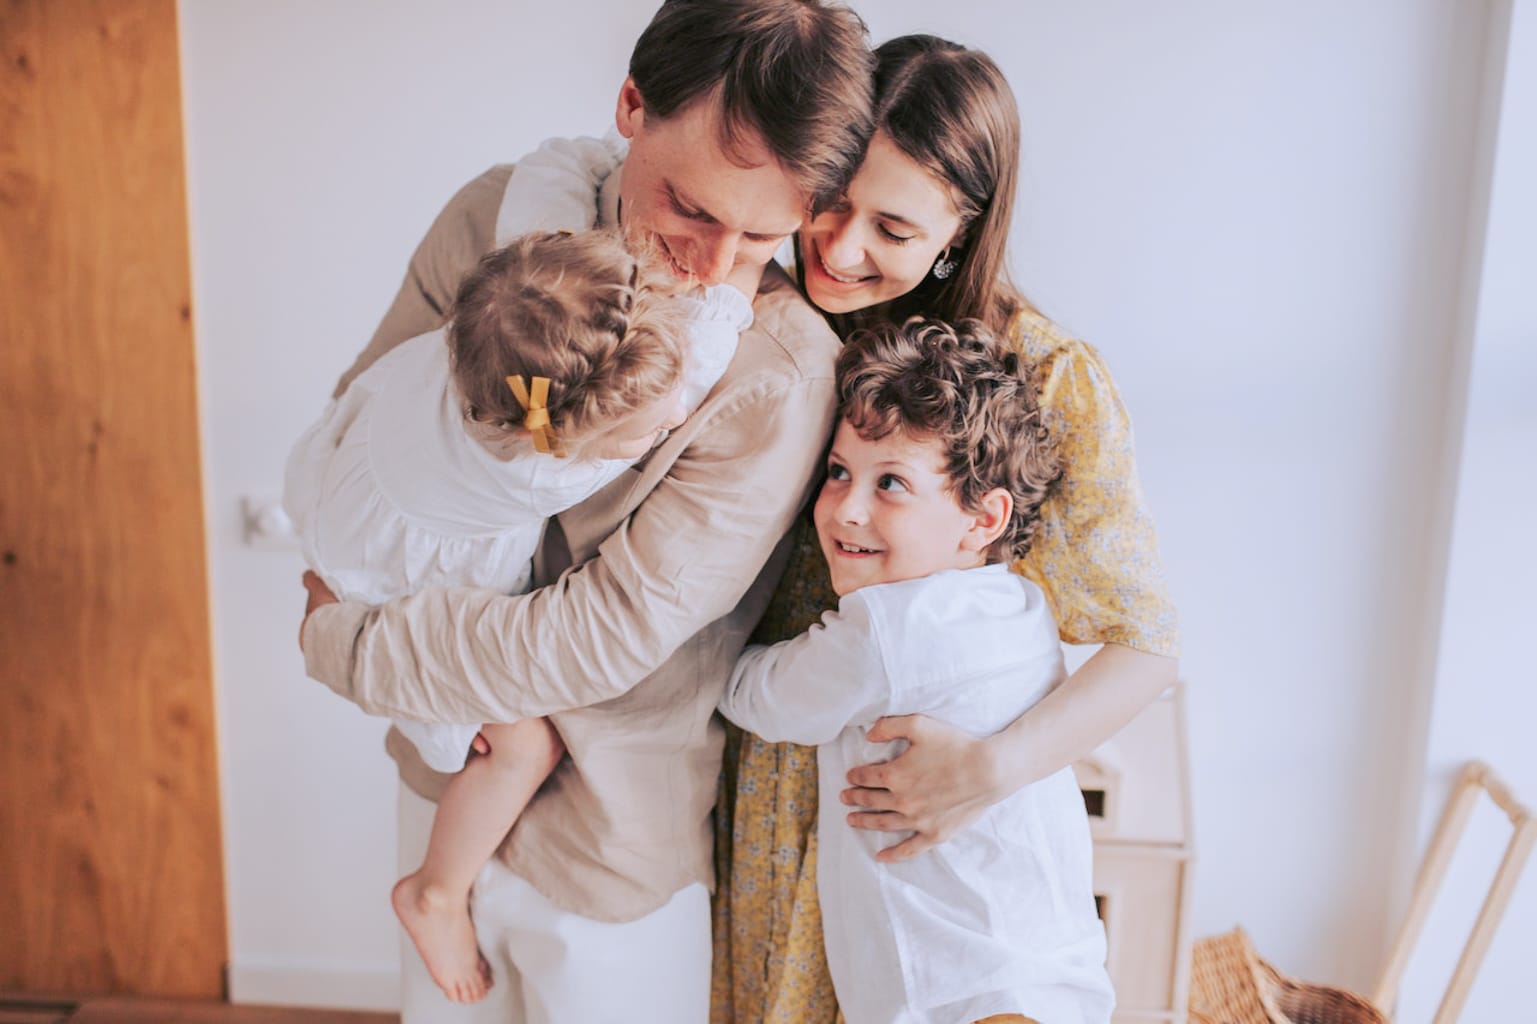 Become a host family! A host family with two parents hug their two children in their home.